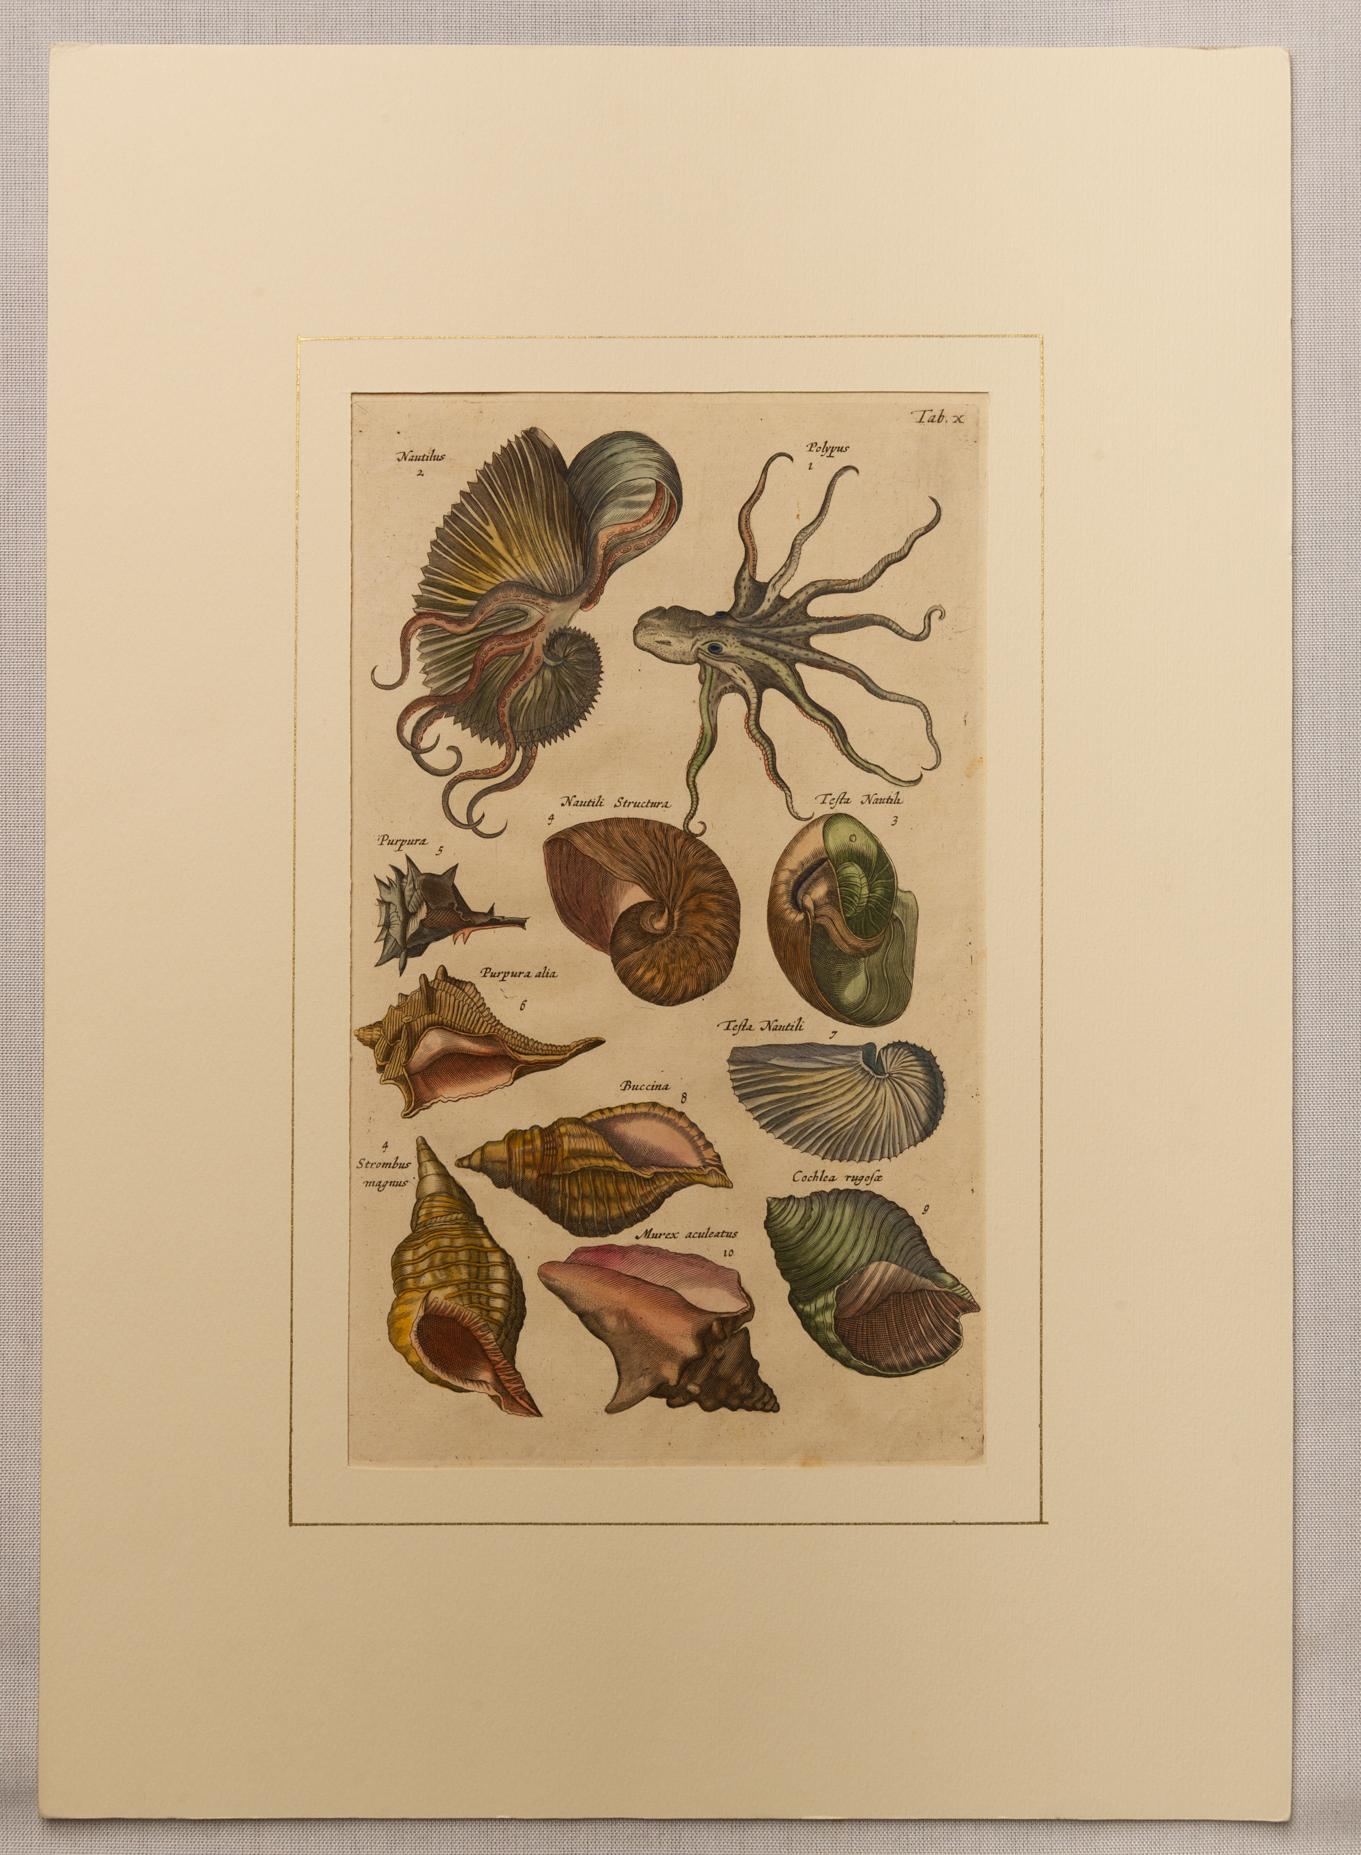 English Rare Series of Fishes Etchings in Latin